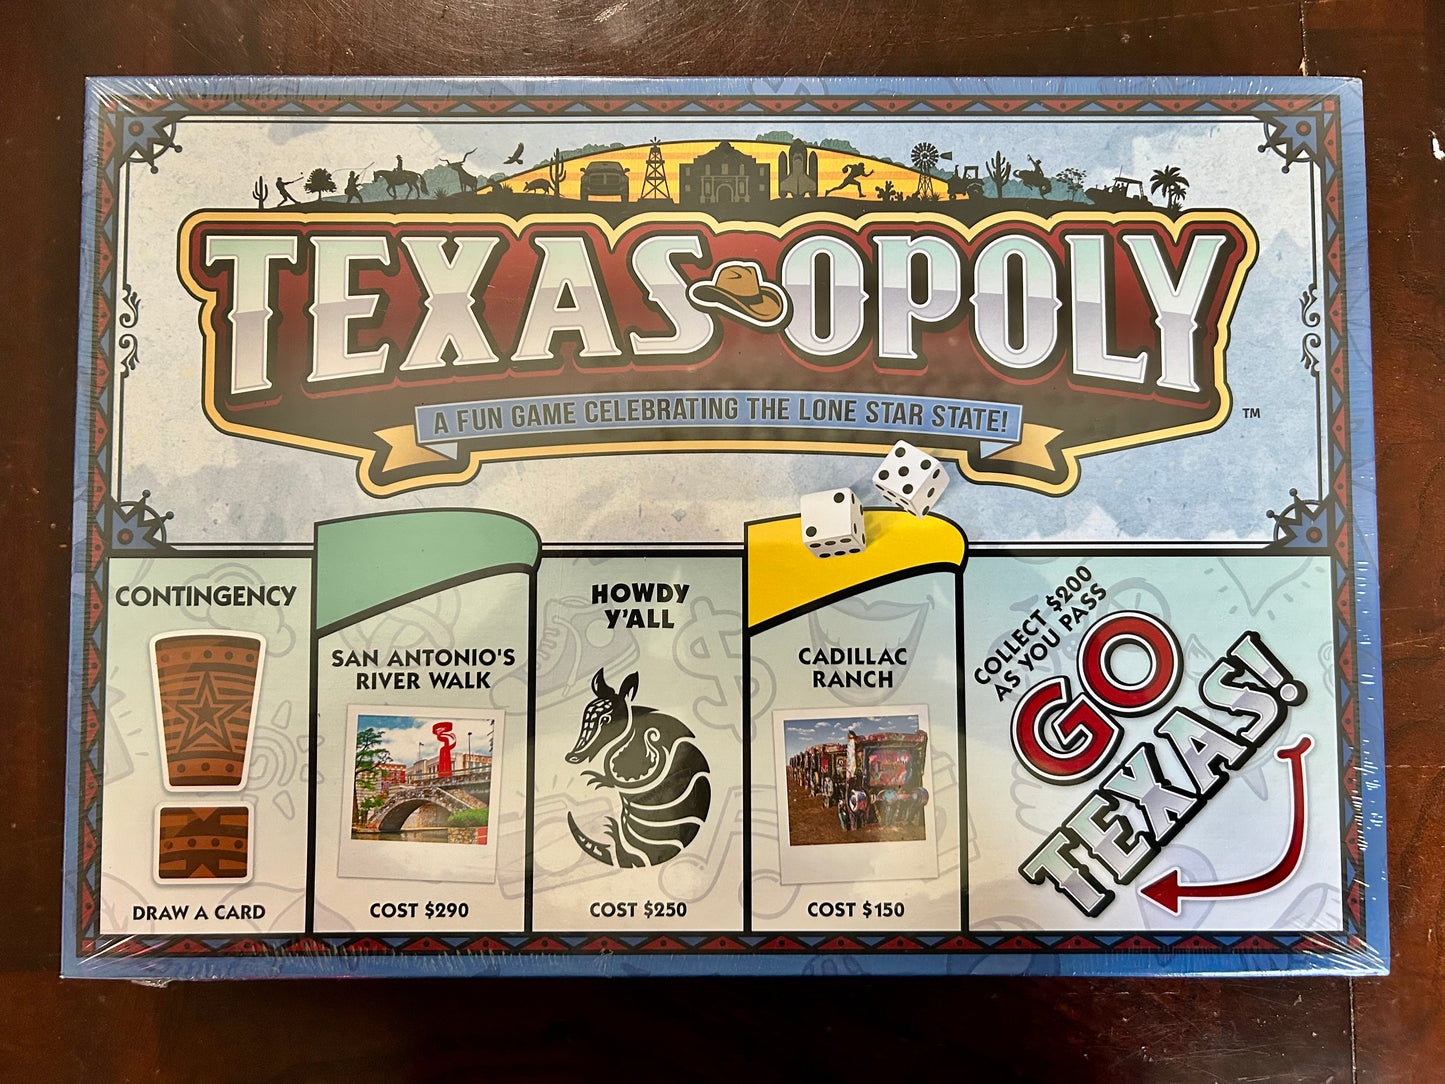 Texas-Opoly Strategy Board Game